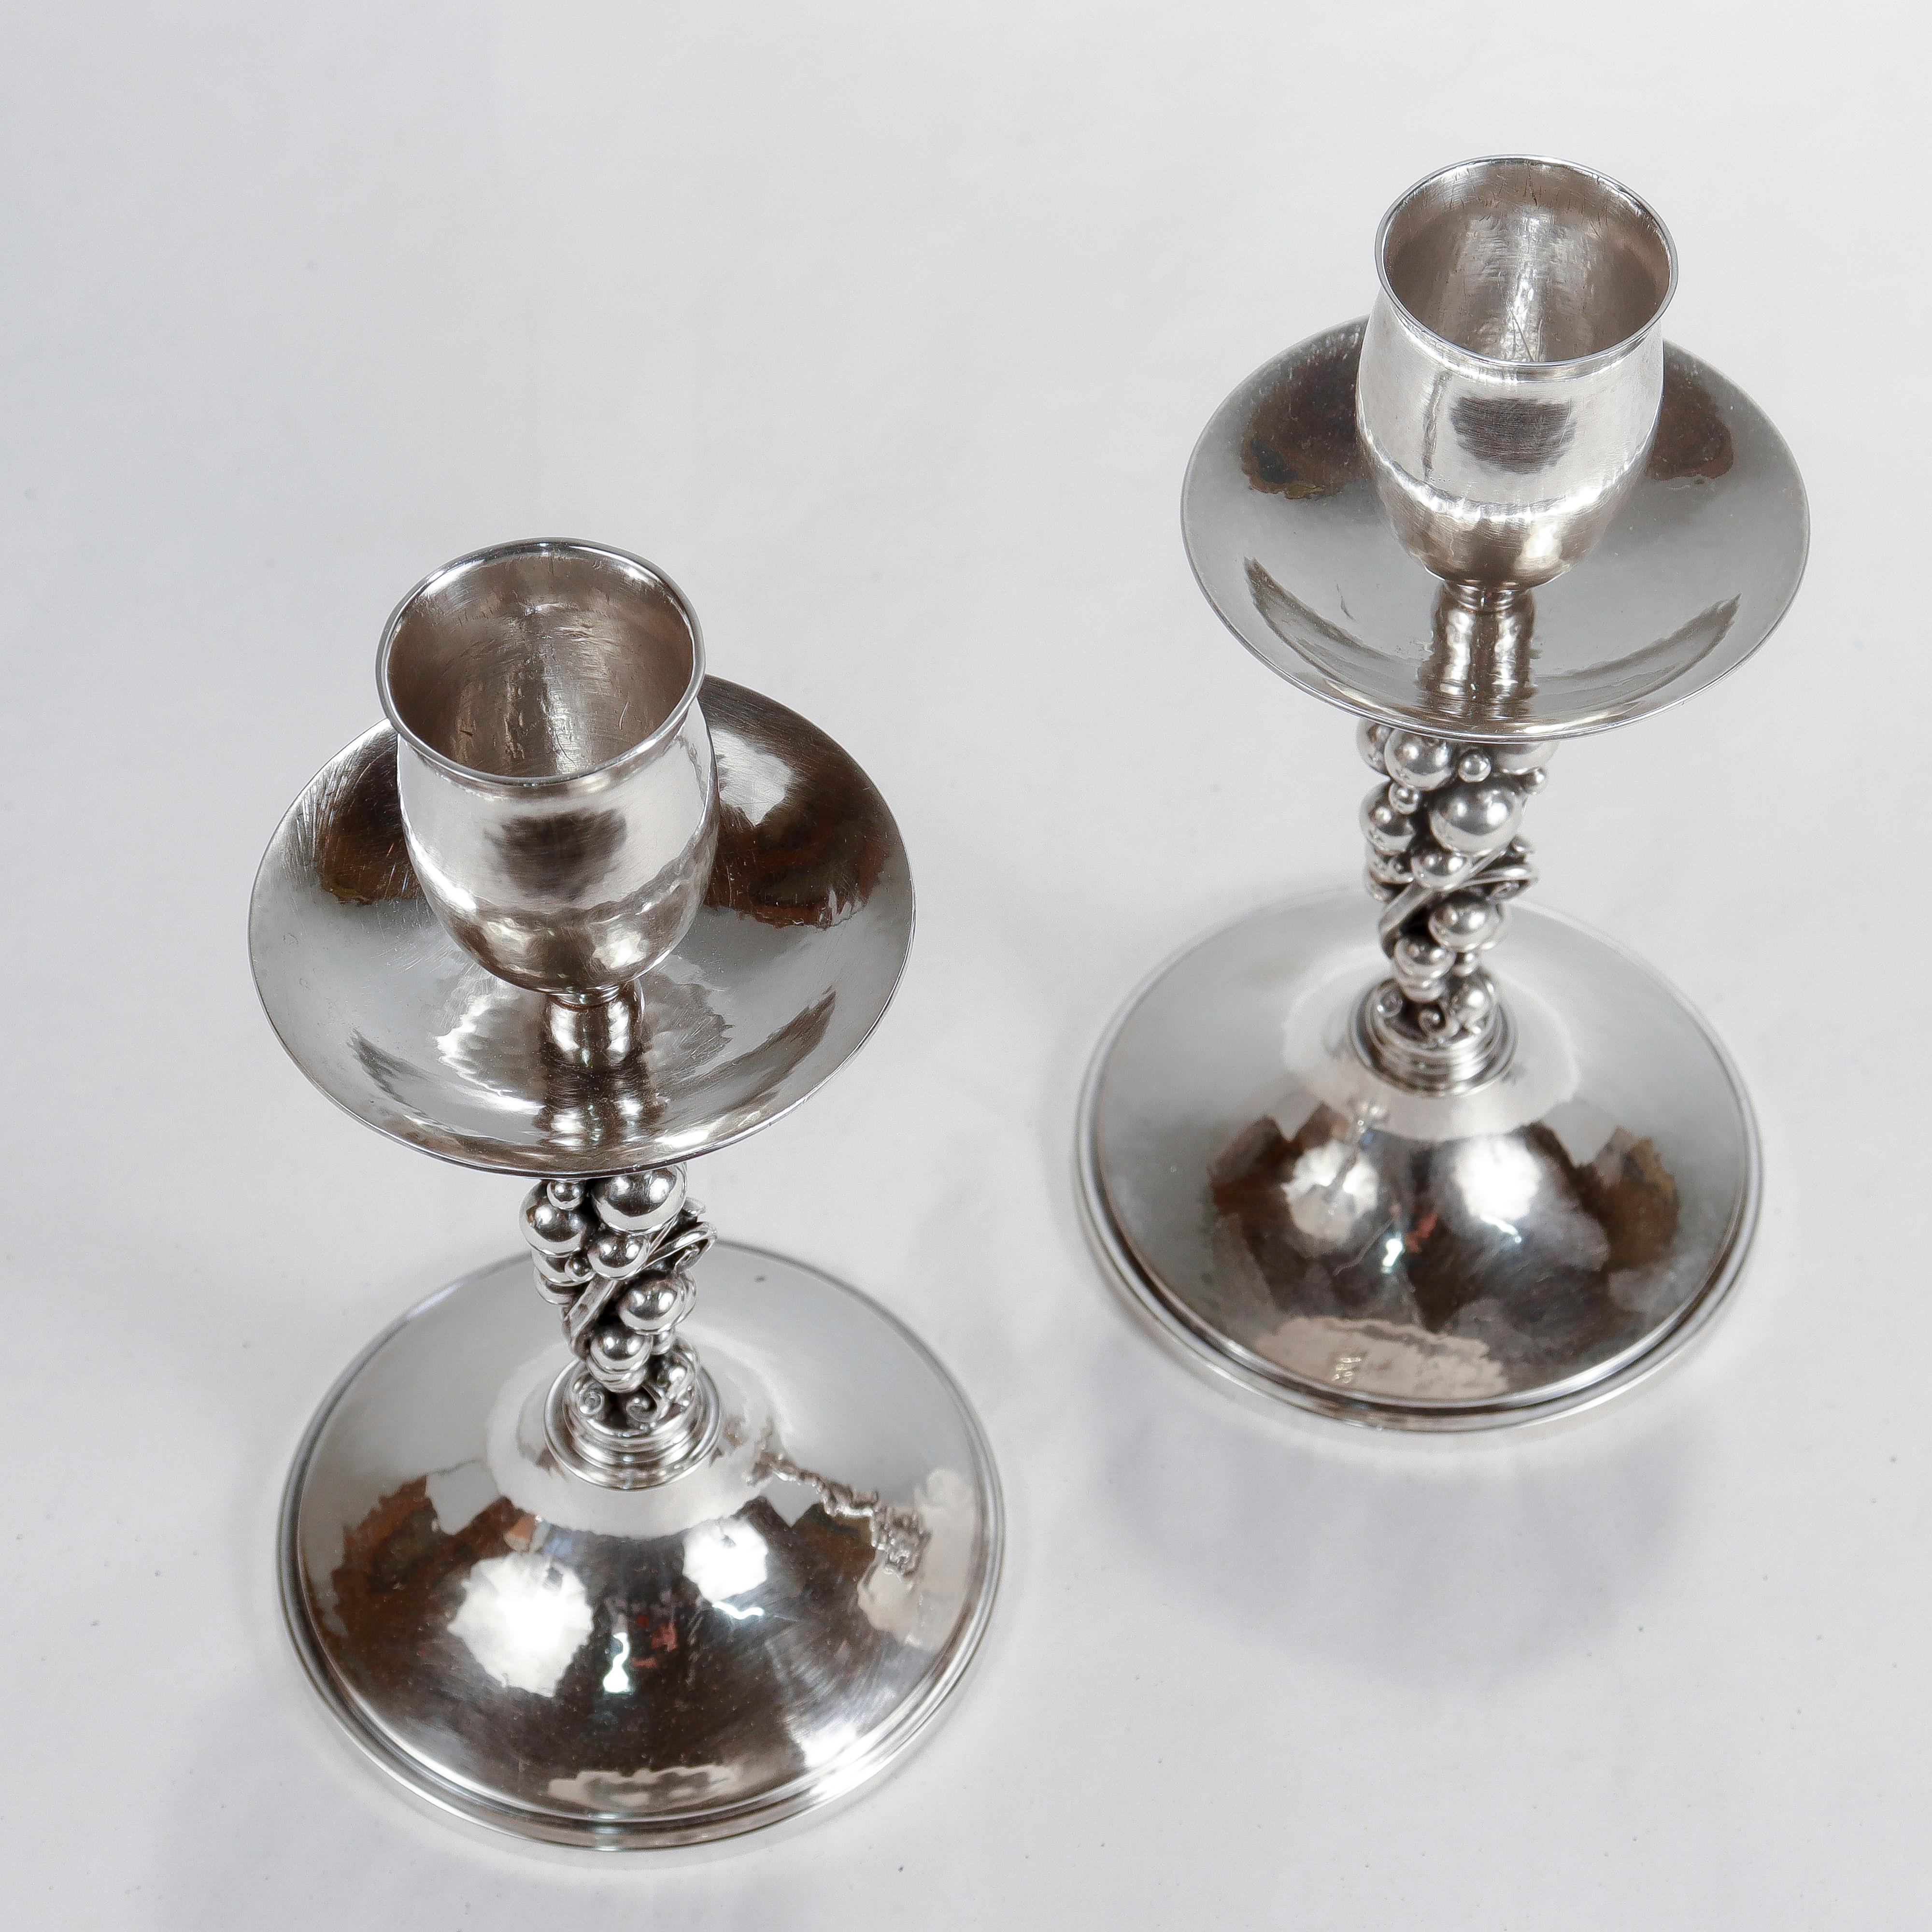 Pair of Signed Danish Modern Sterling Silver Grapes Candlesticks by Aage Weimar For Sale 7